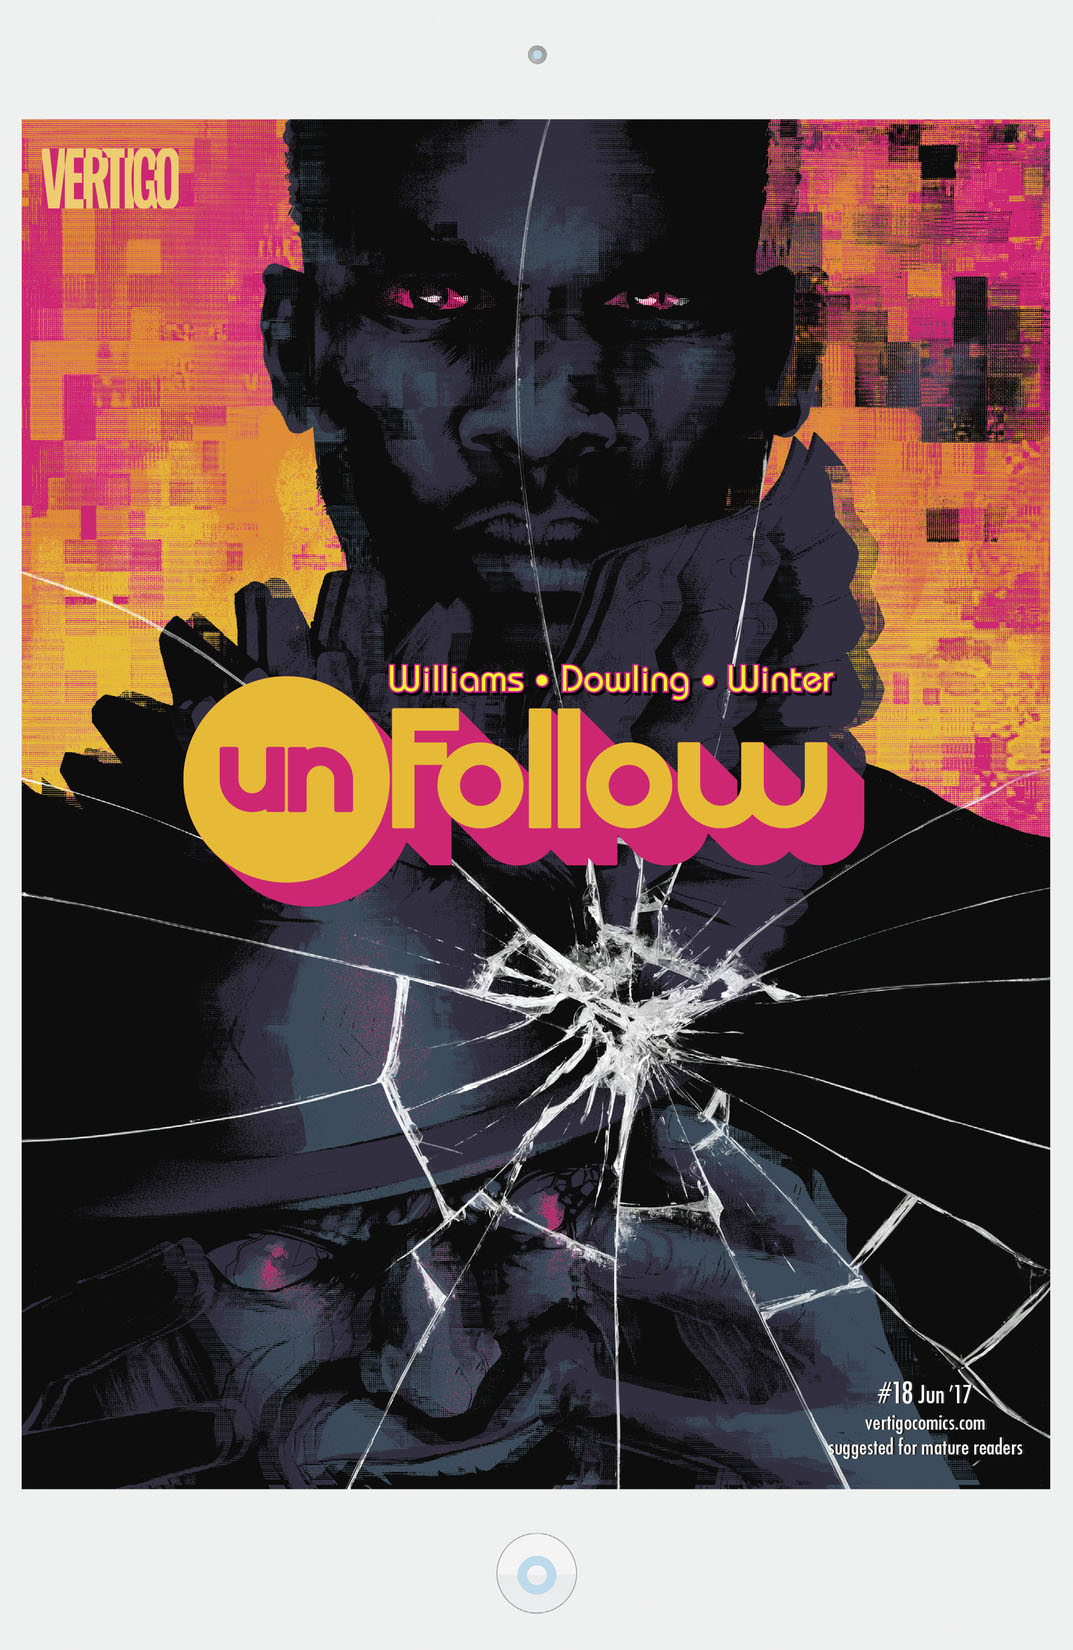 Unfollow #18 preview images